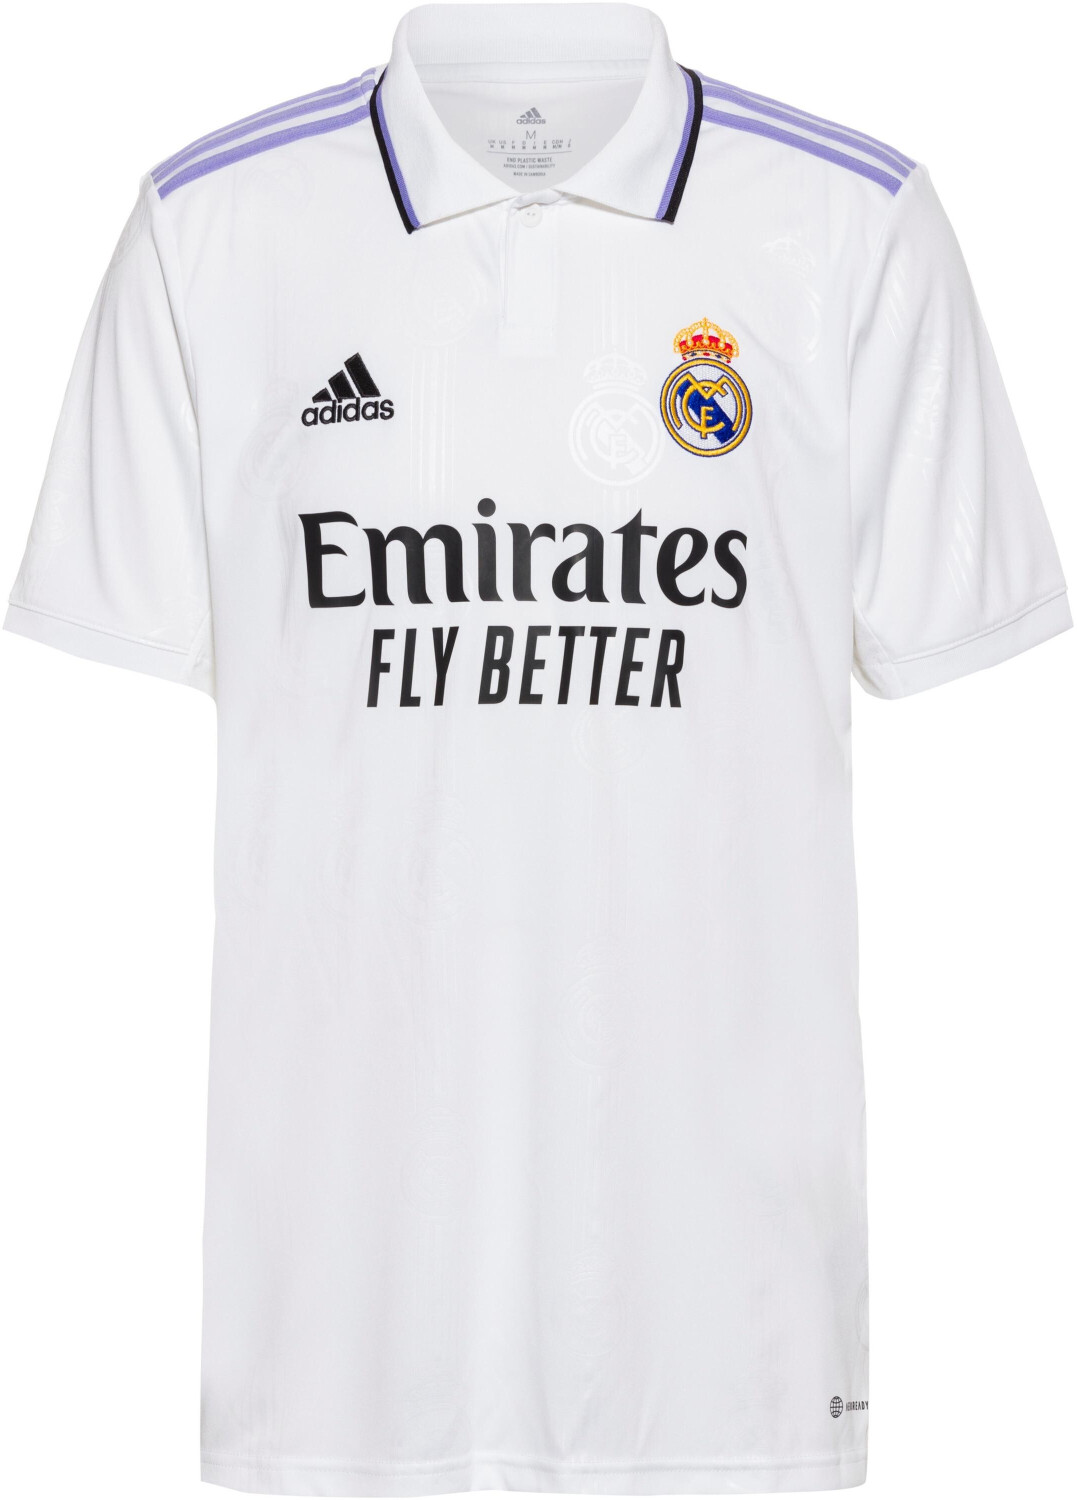 Maillot de foot third Real Madrid 2021/2022 manches courtes Femme